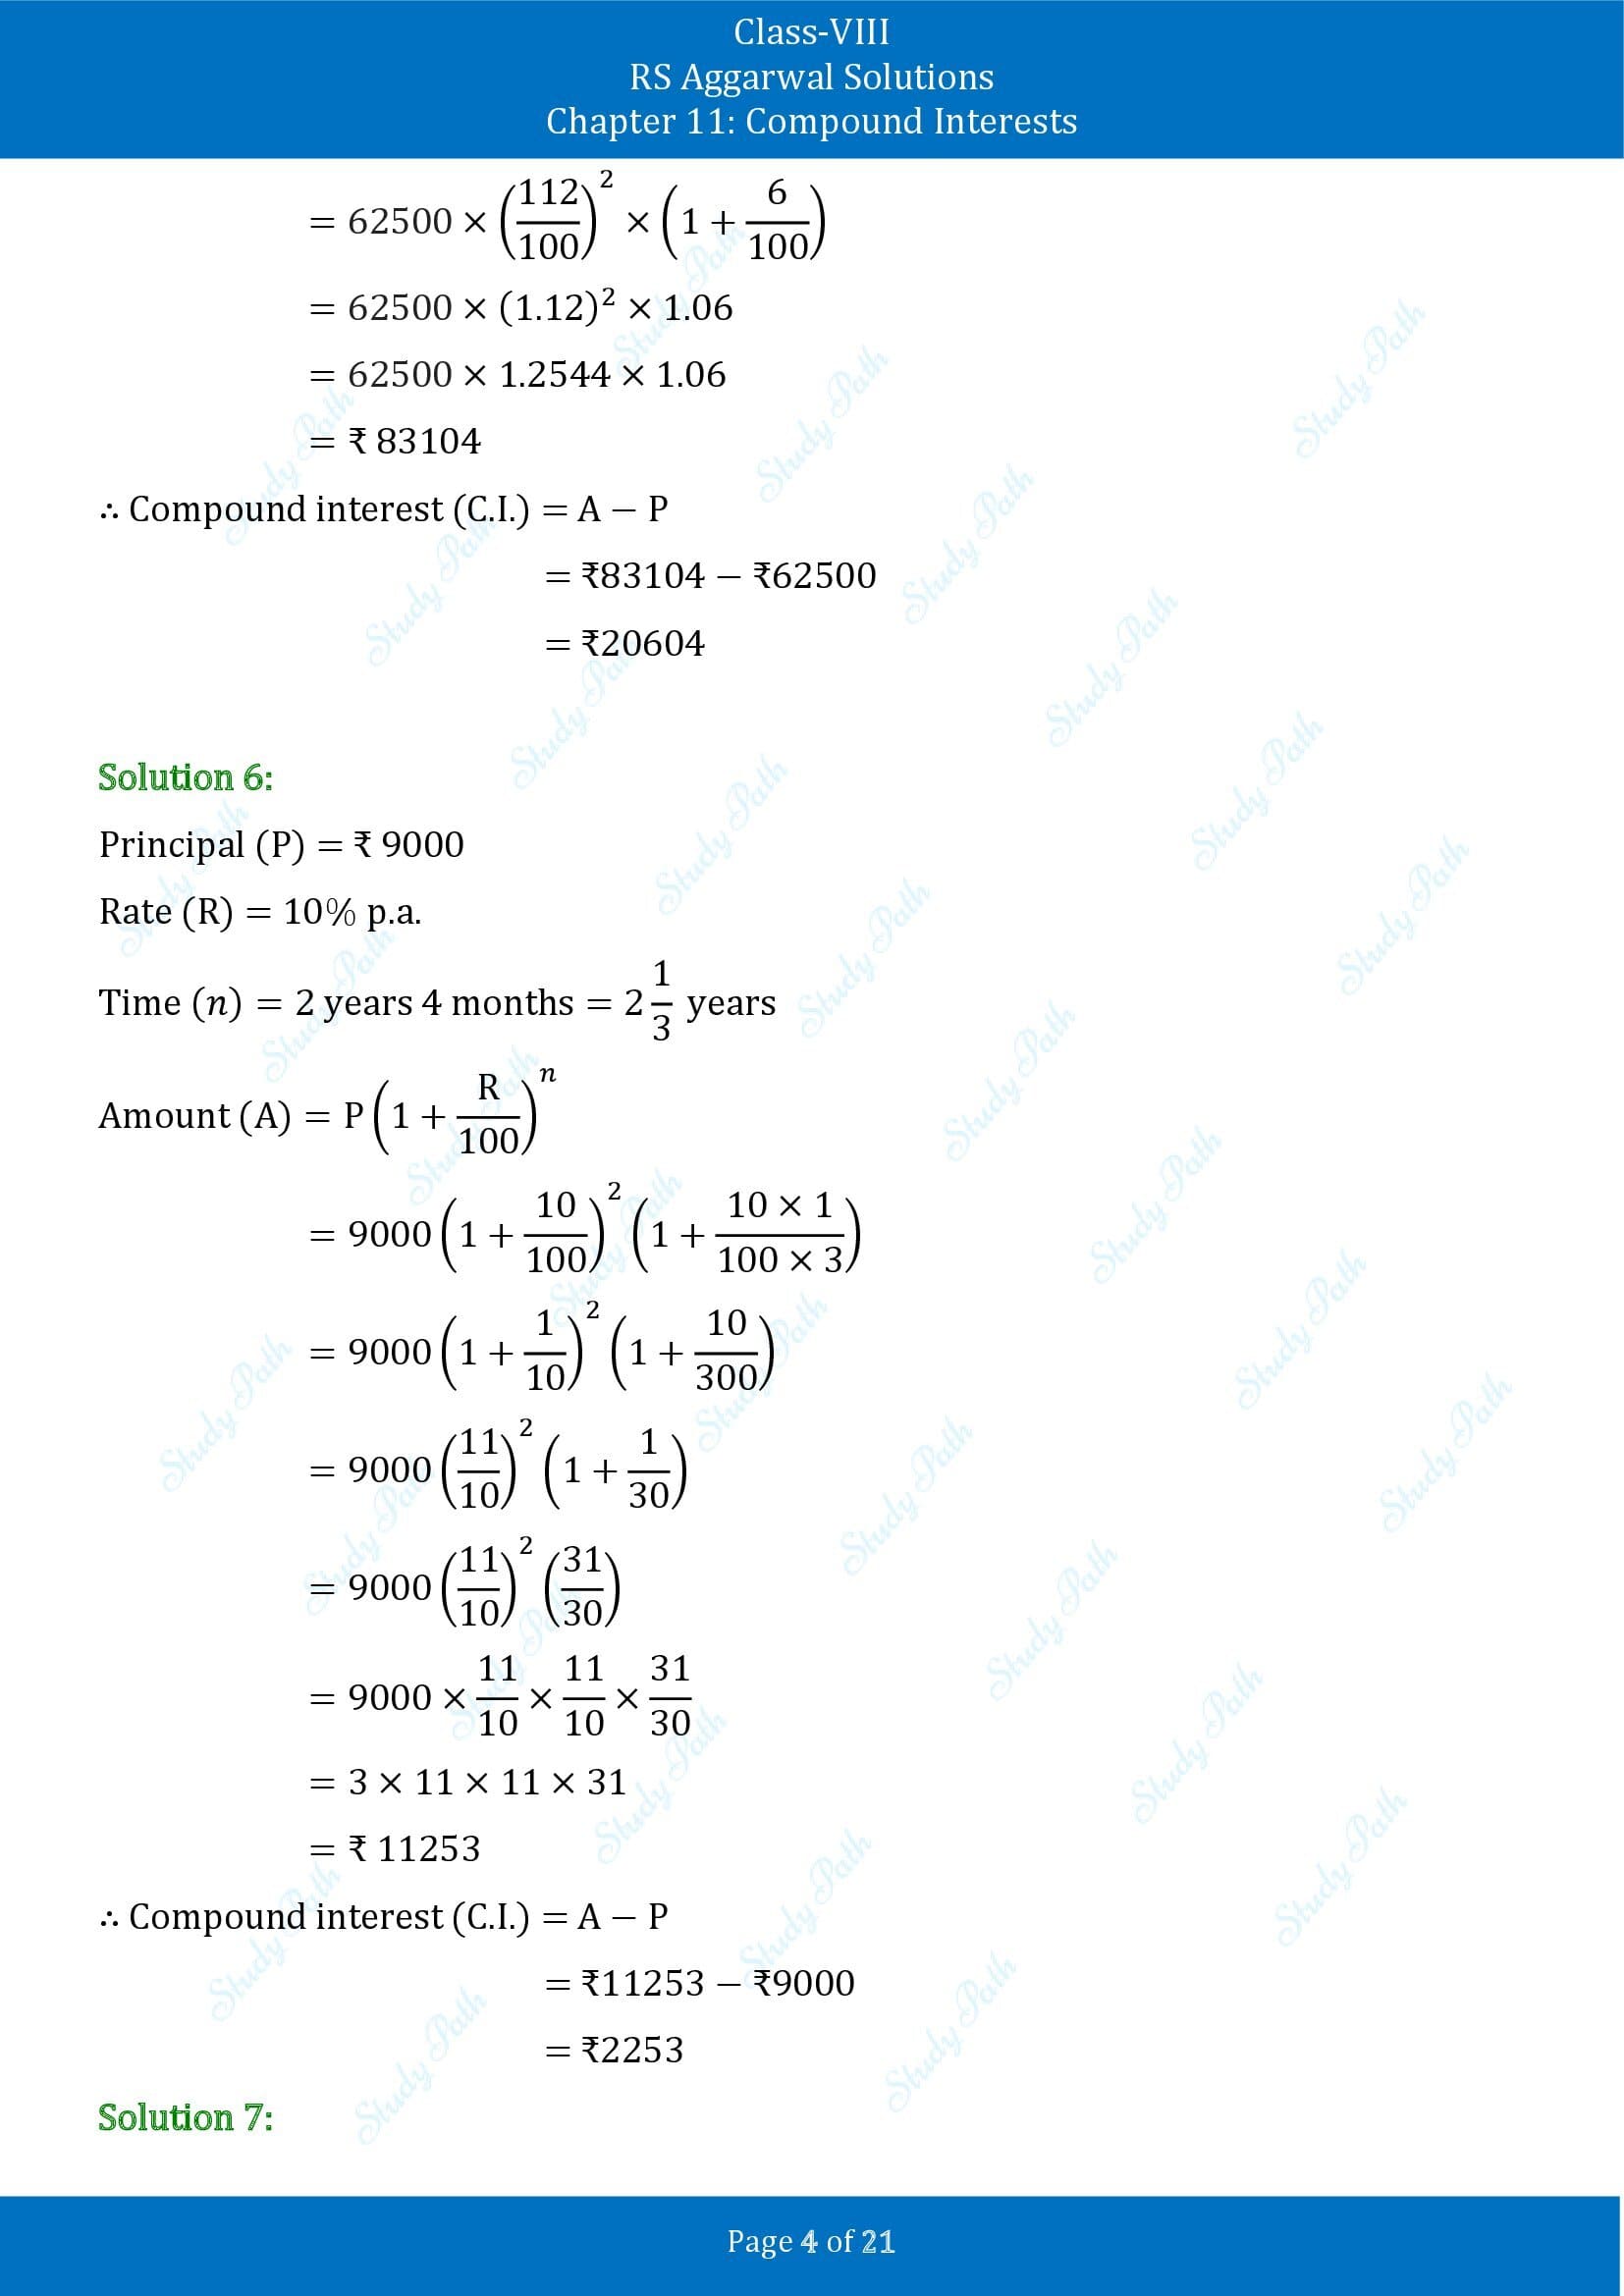 RS Aggarwal Solutions Class 8 Chapter 11 Compound Interests Exercise 11B 00004